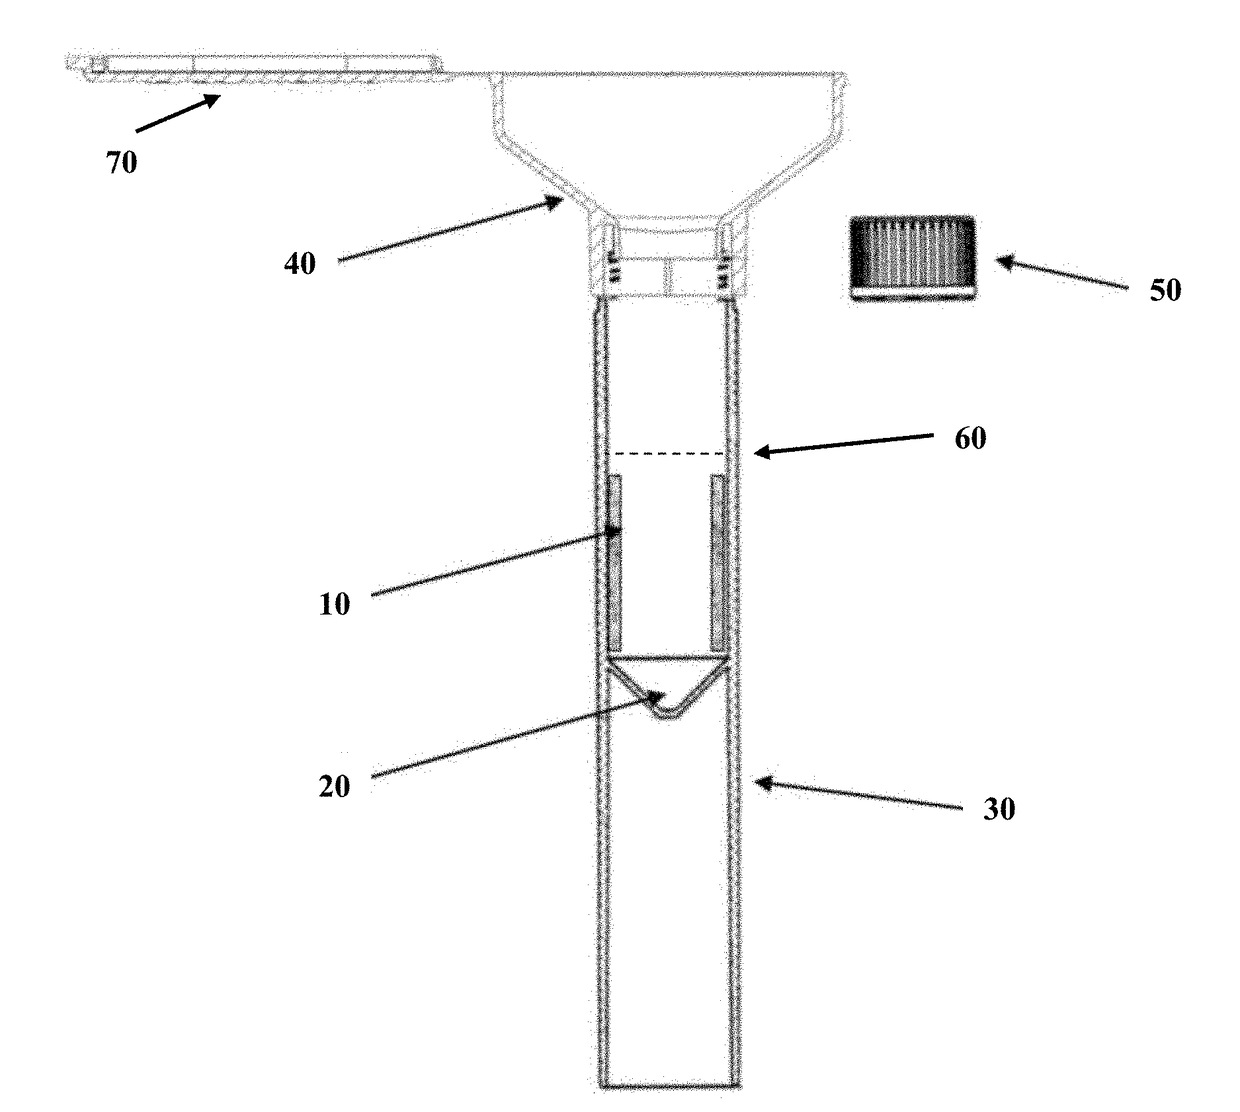 Sample collection and DNA preservation device